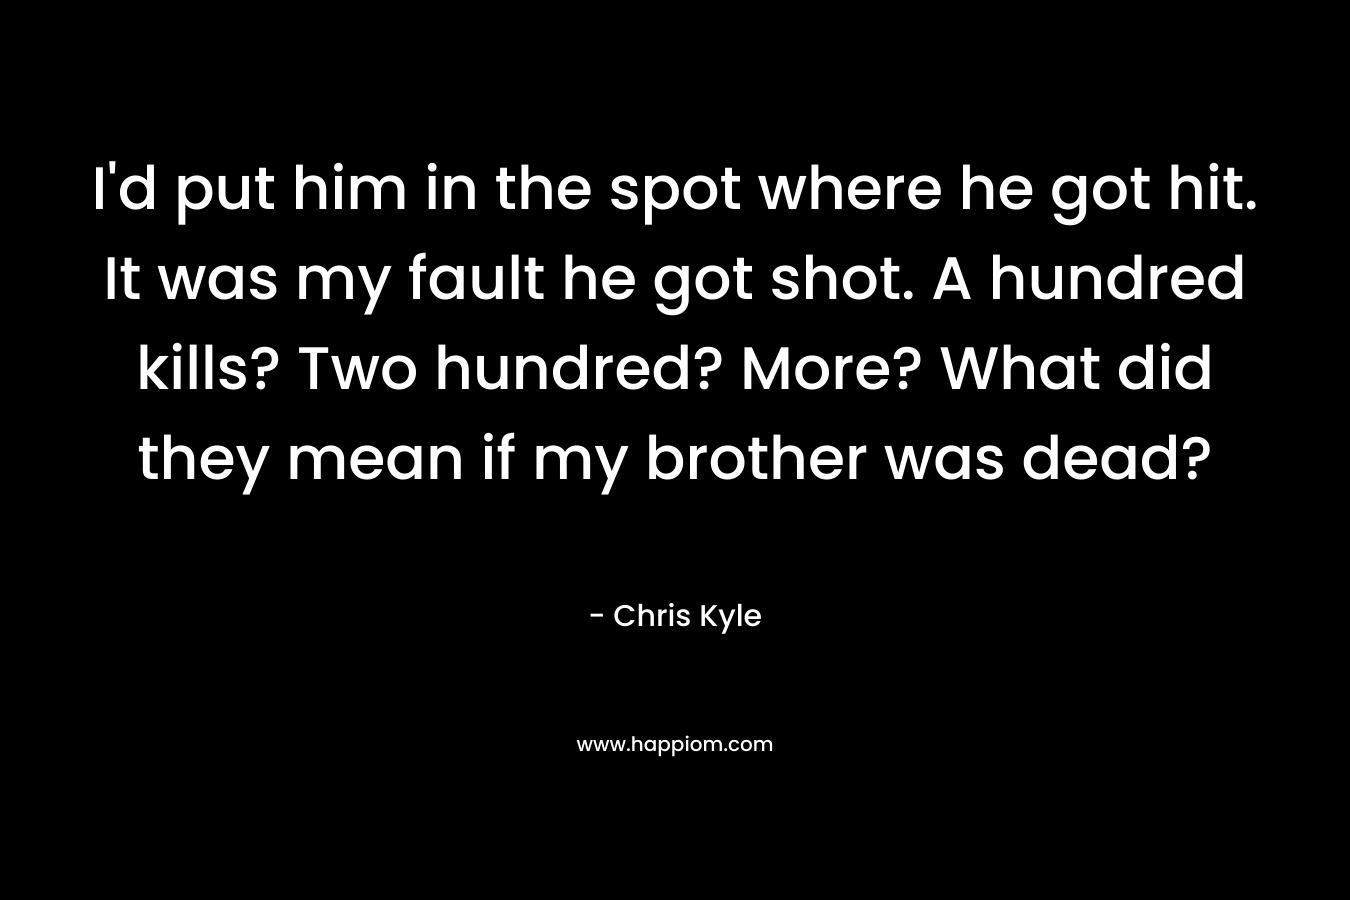 I’d put him in the spot where he got hit. It was my fault he got shot. A hundred kills? Two hundred? More? What did they mean if my brother was dead? – Chris Kyle